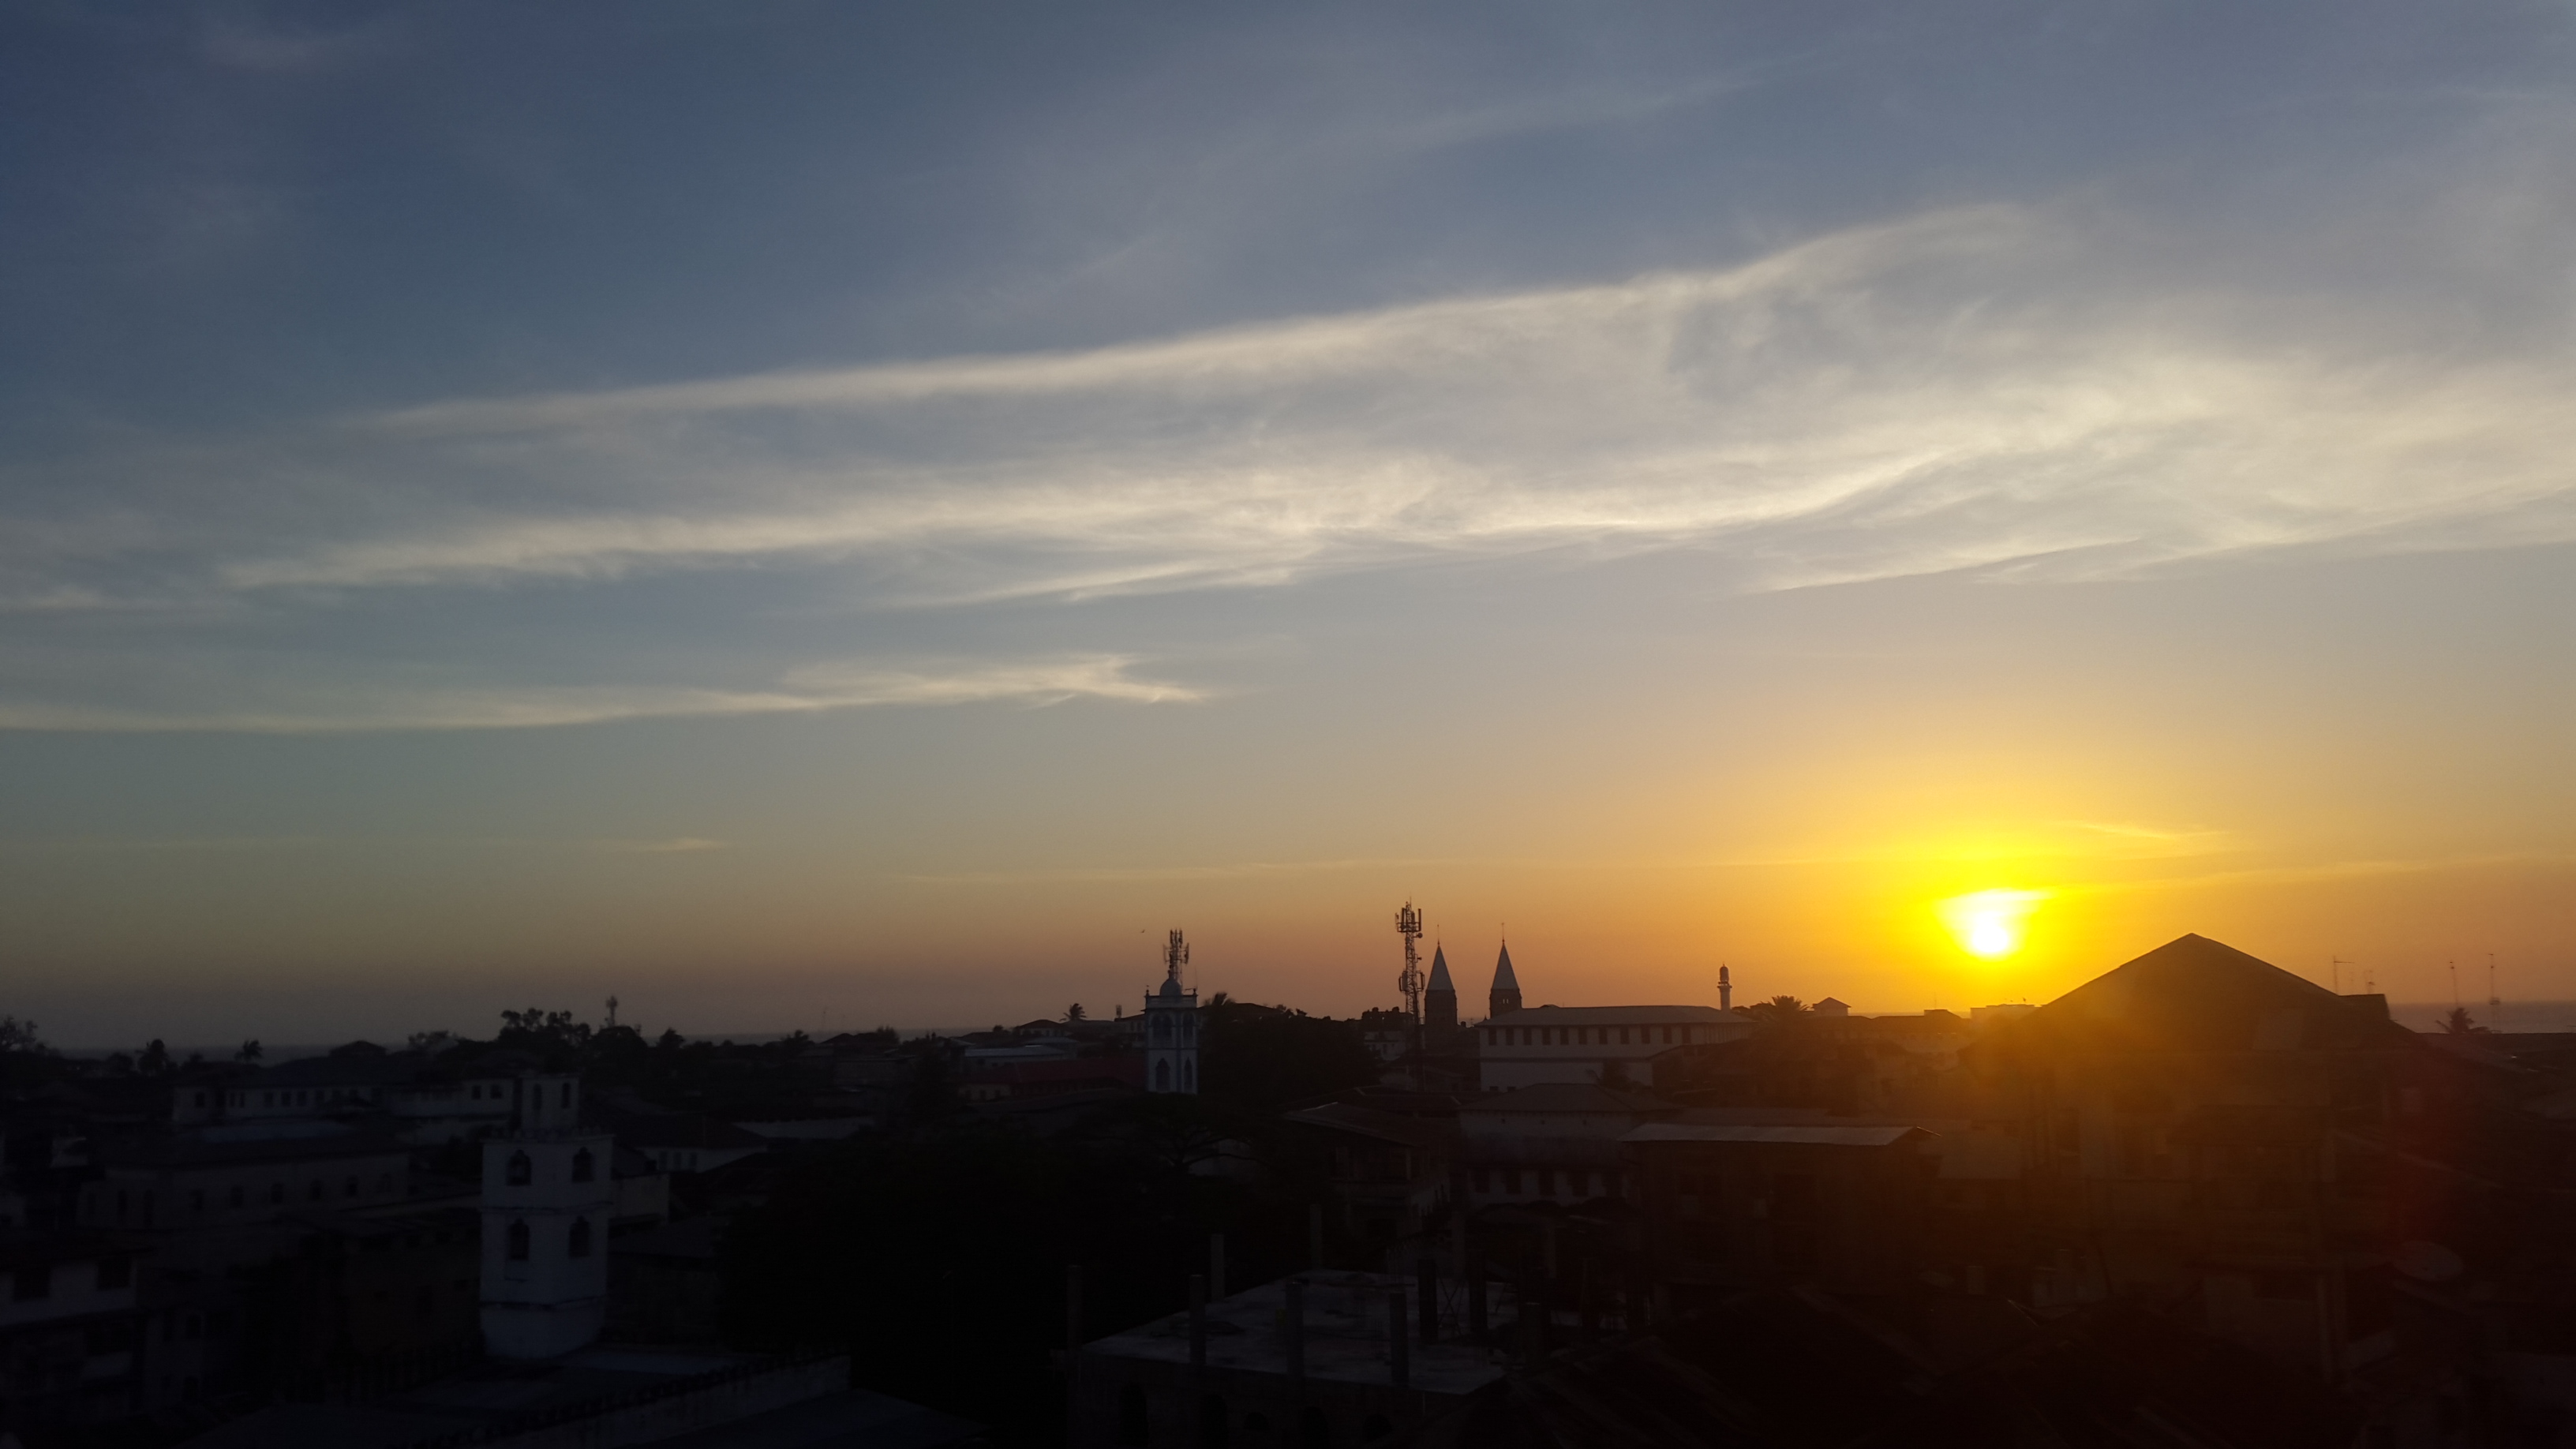 20151013_181143 - Sunset in Stone Town